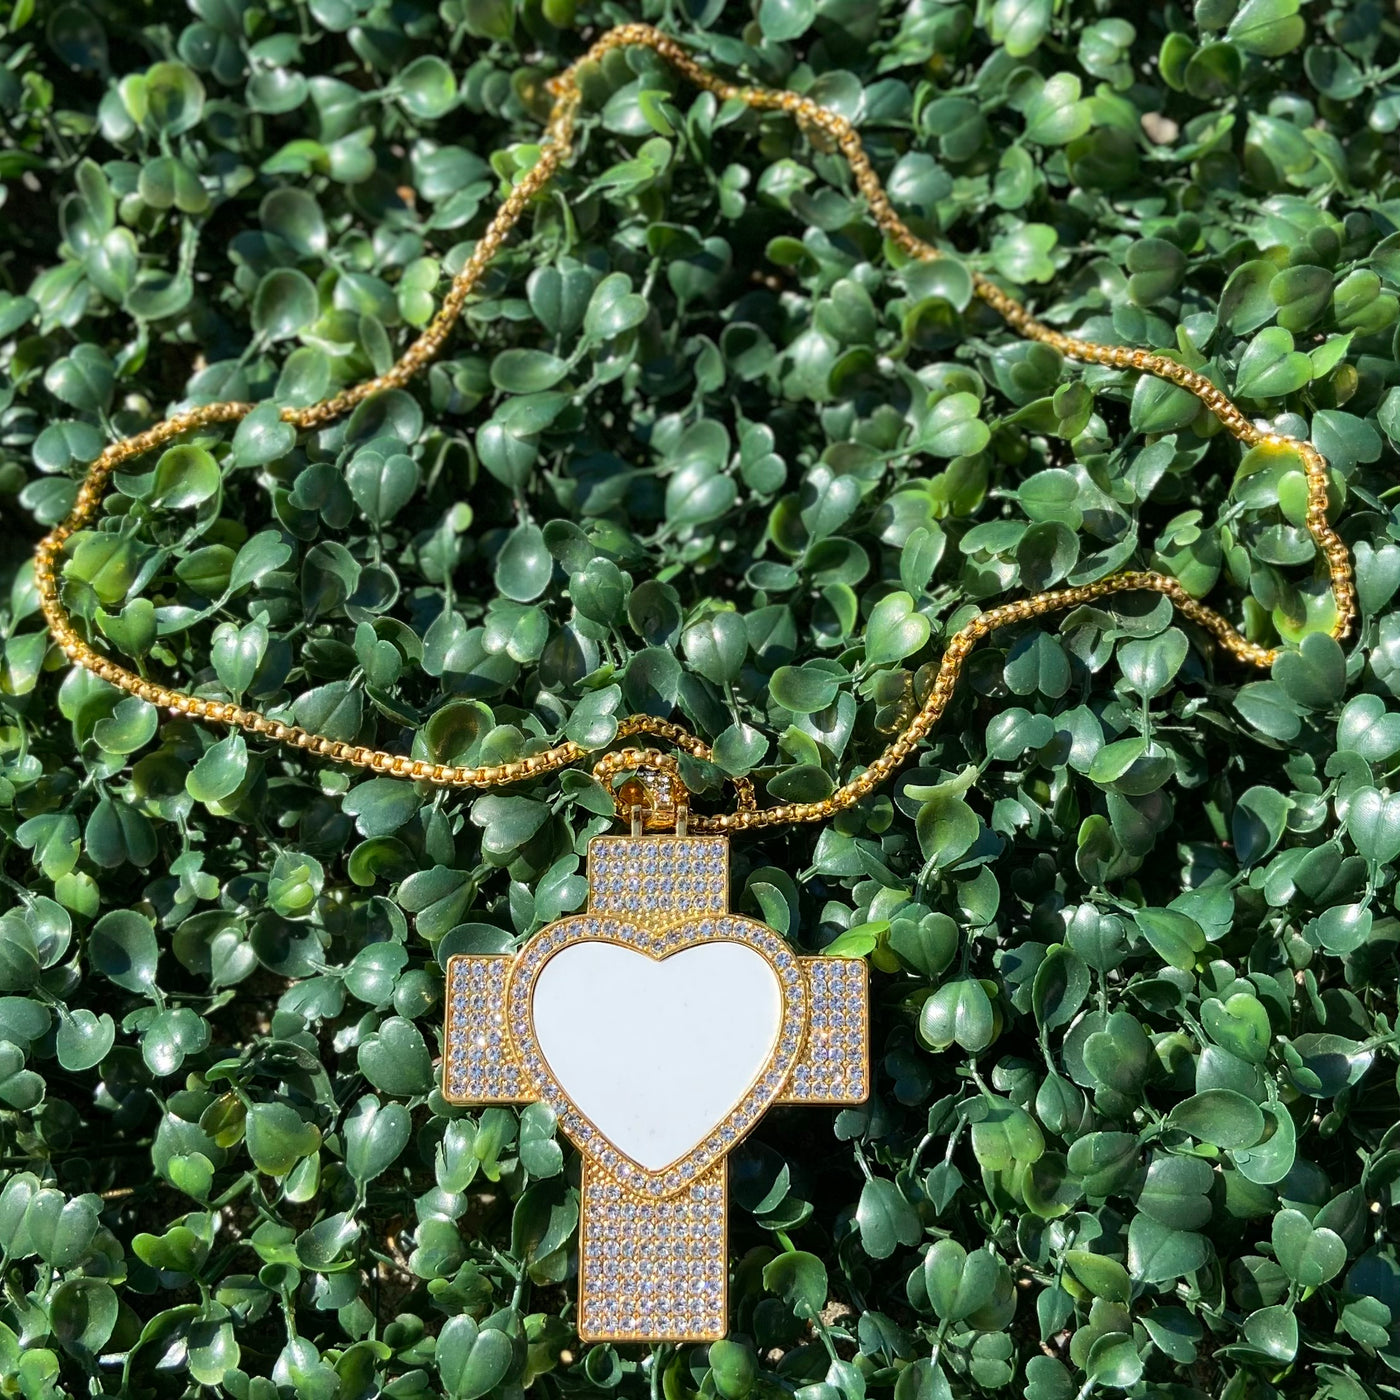 Sublimation Cross Necklace